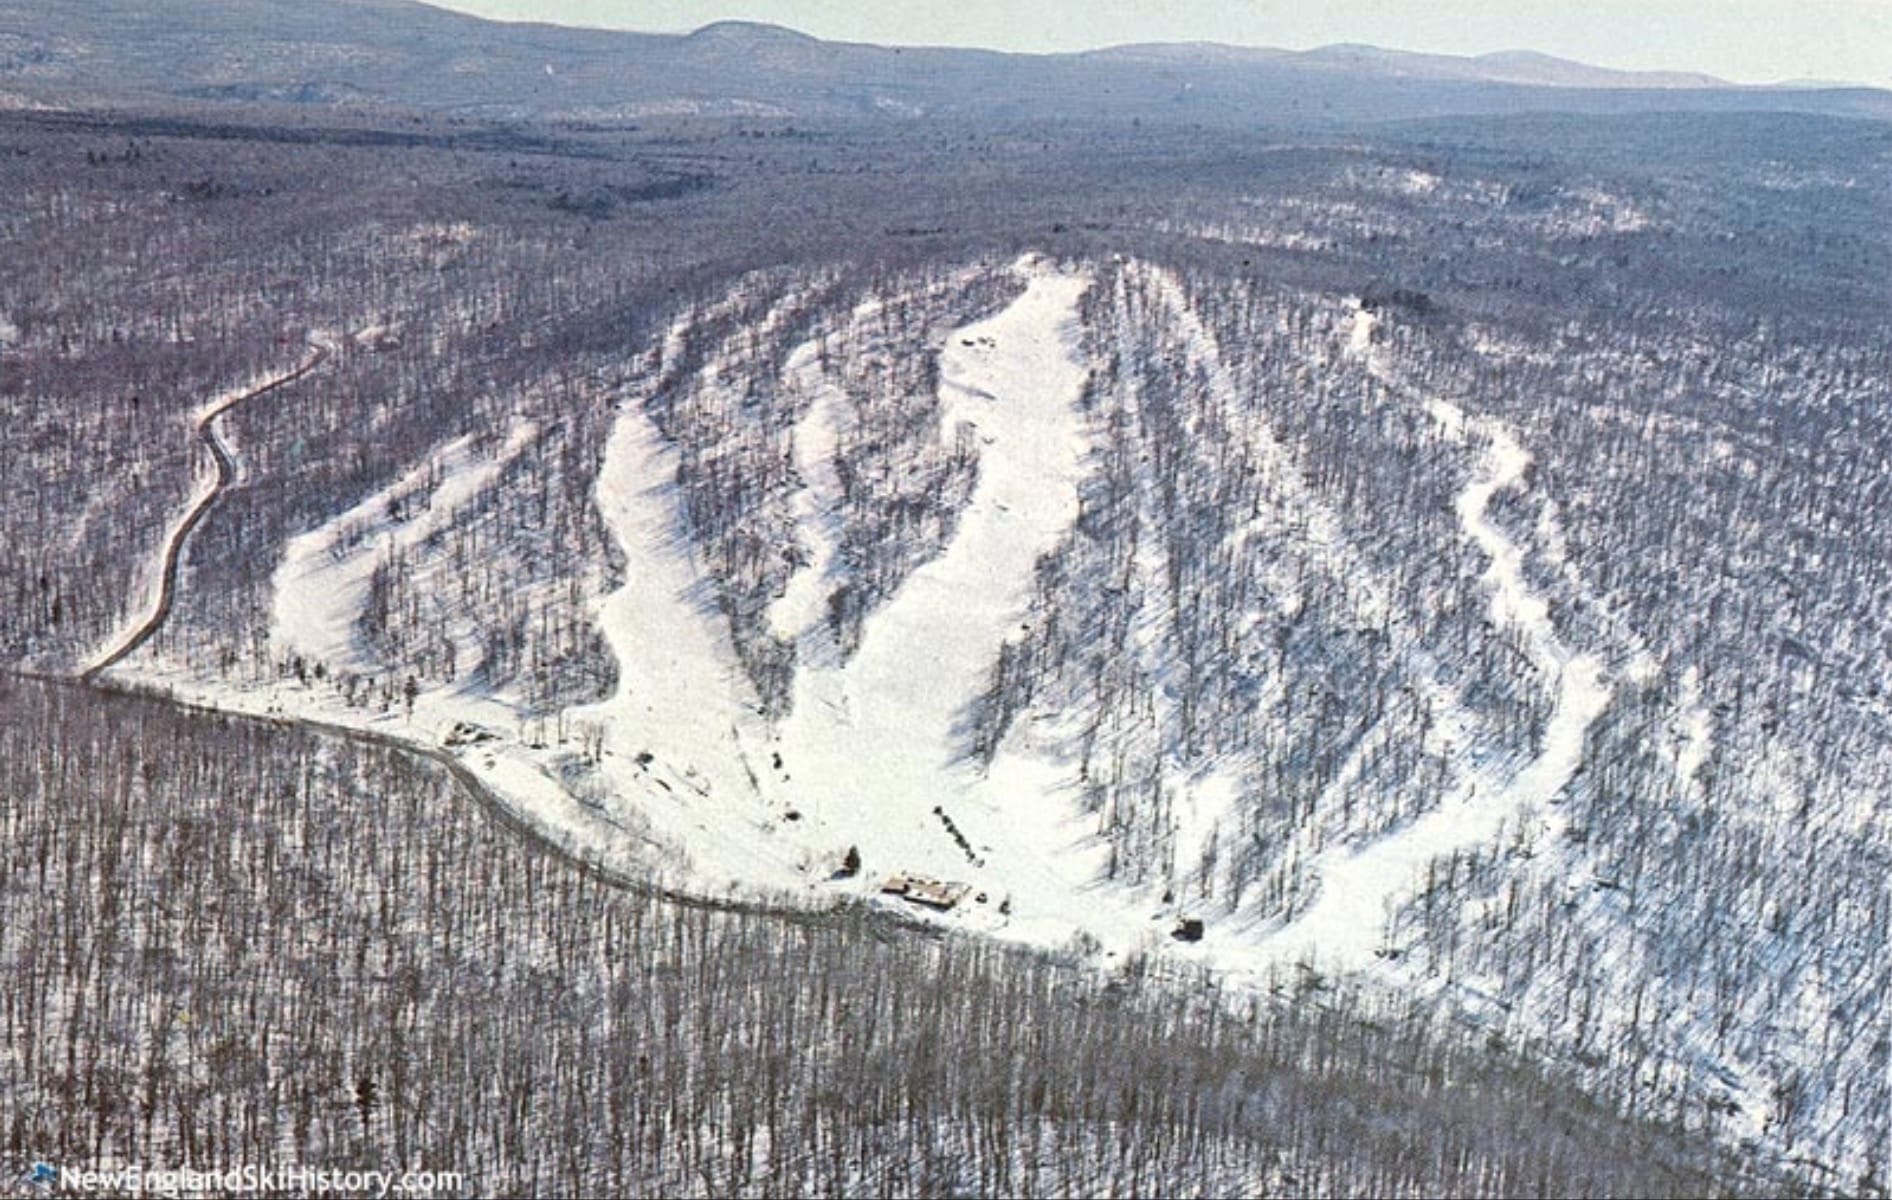 Is This Auction Bound Vermont Ski Area Worth Reopening?(Closed Since ’80s)